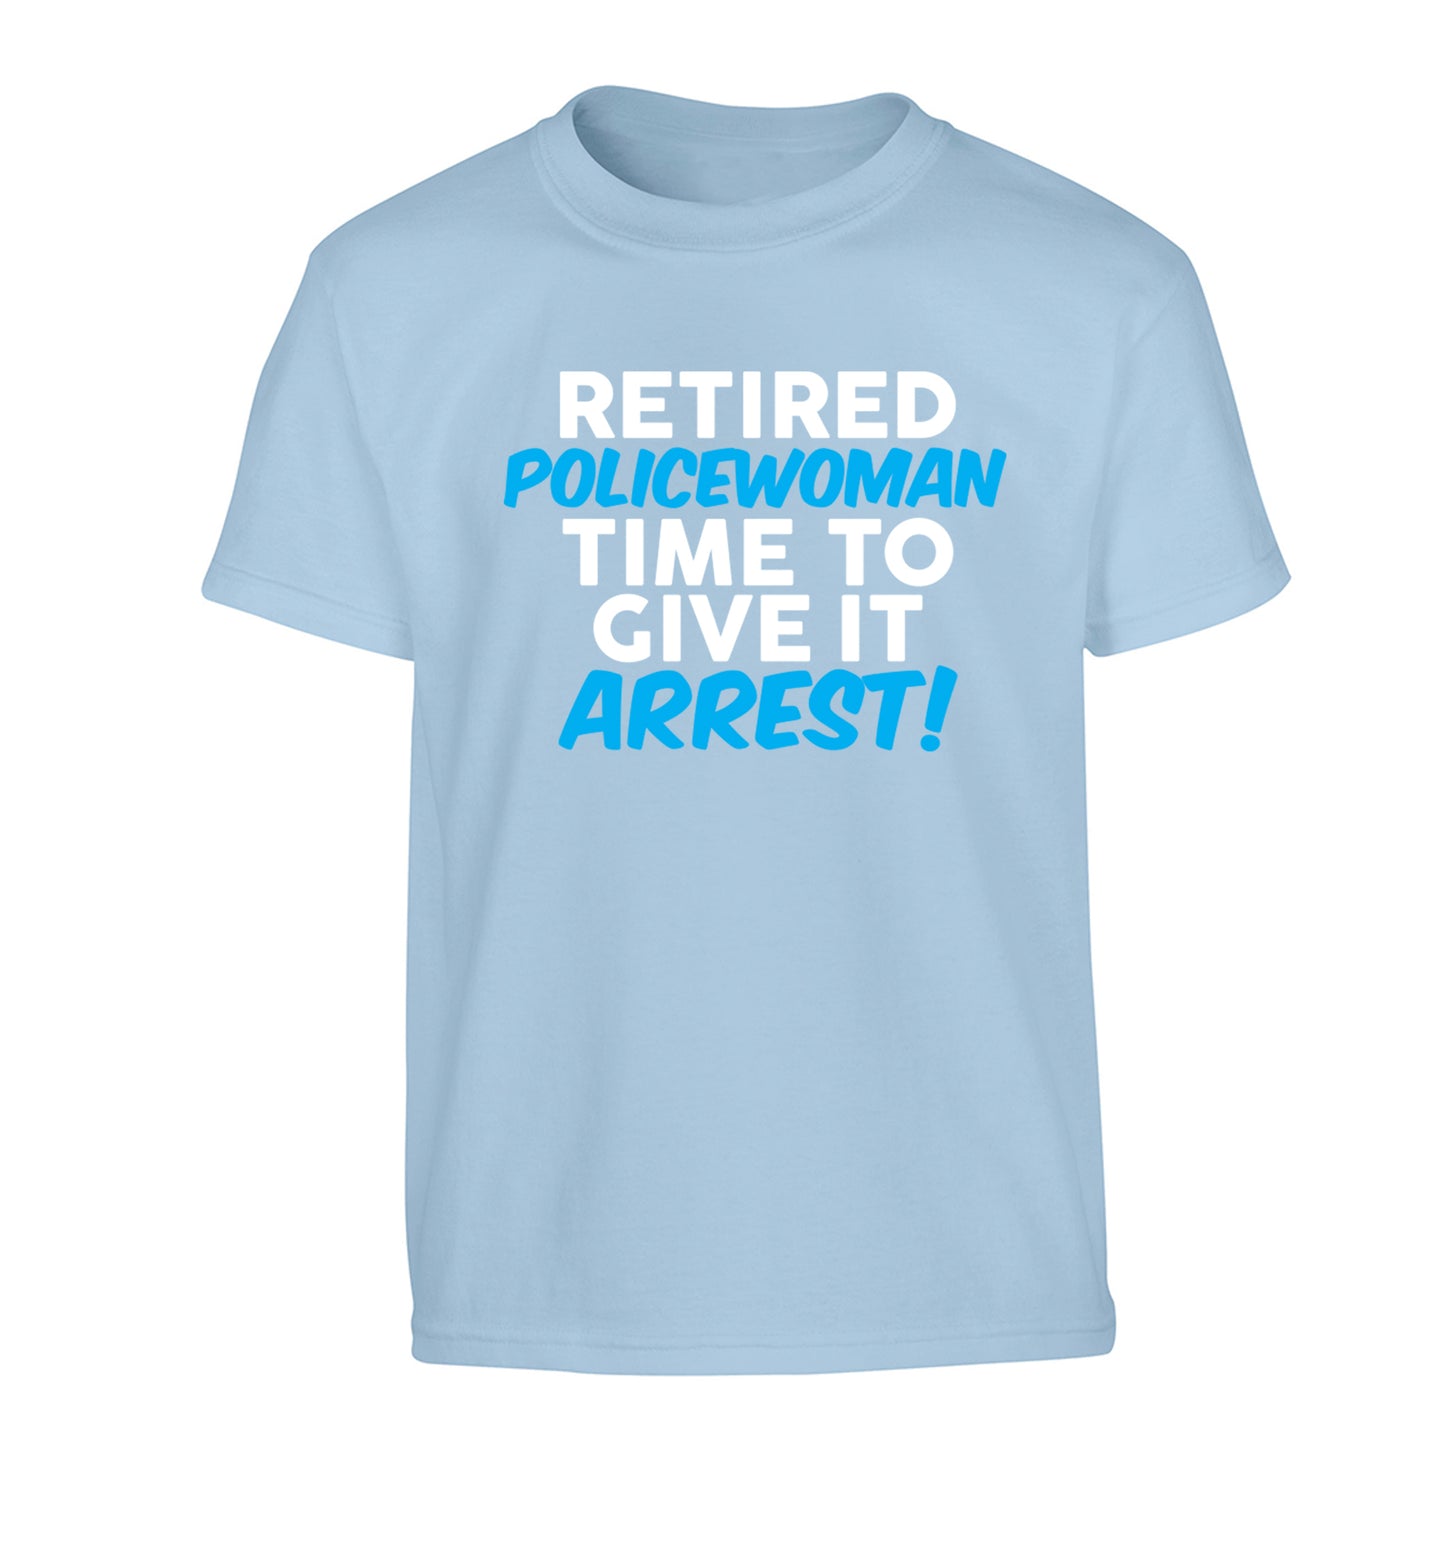 Retired policewoman time to give it arrest Children's light blue Tshirt 12-13 Years